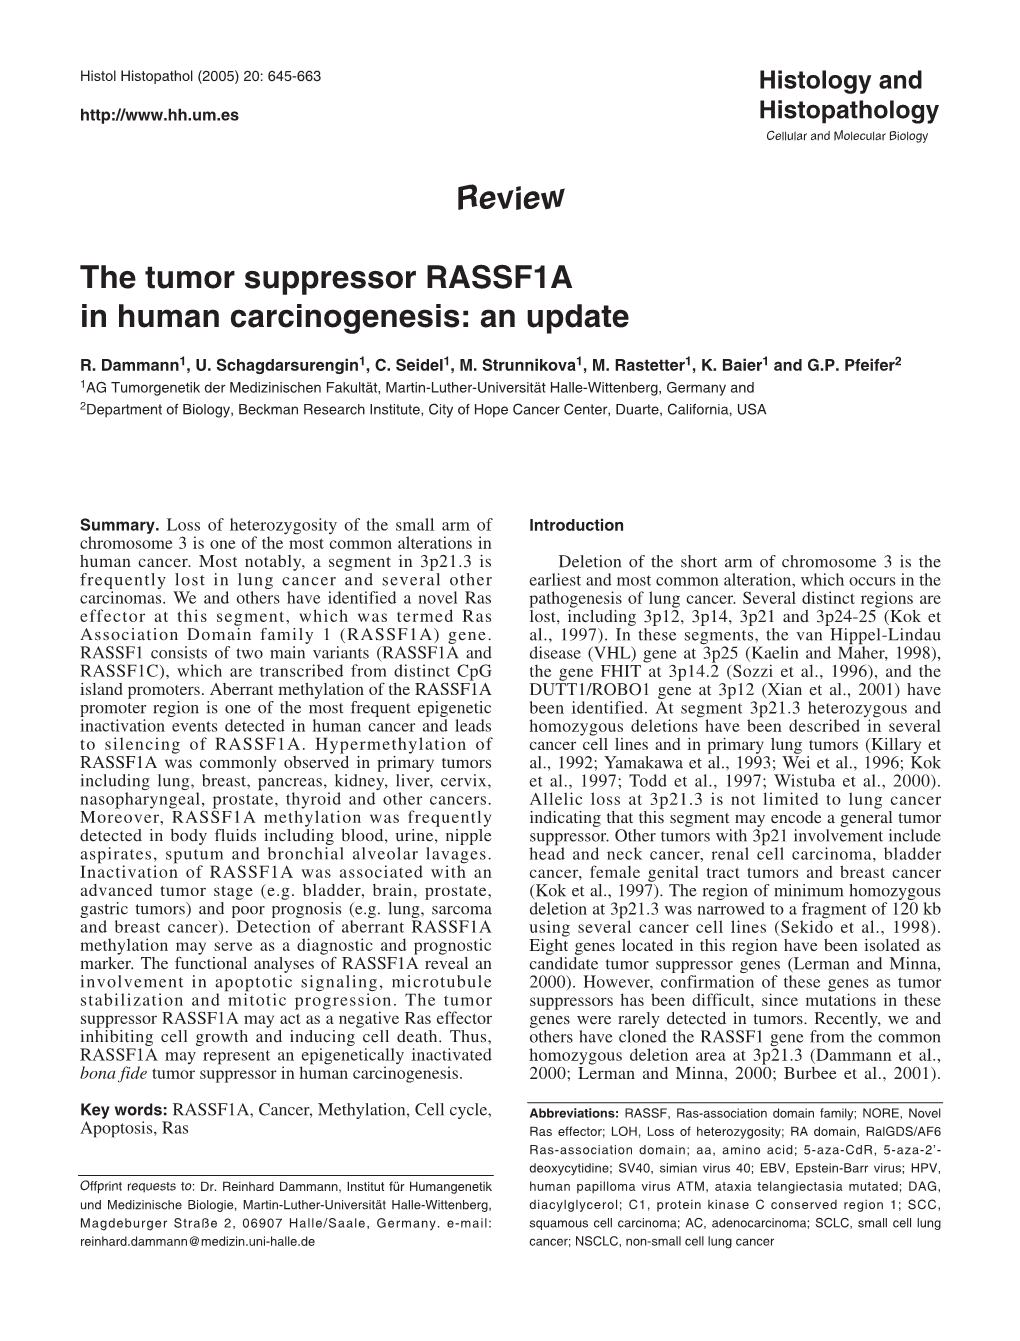 Review the Tumor Suppressor RASSF1A in Human Carcinogenesis